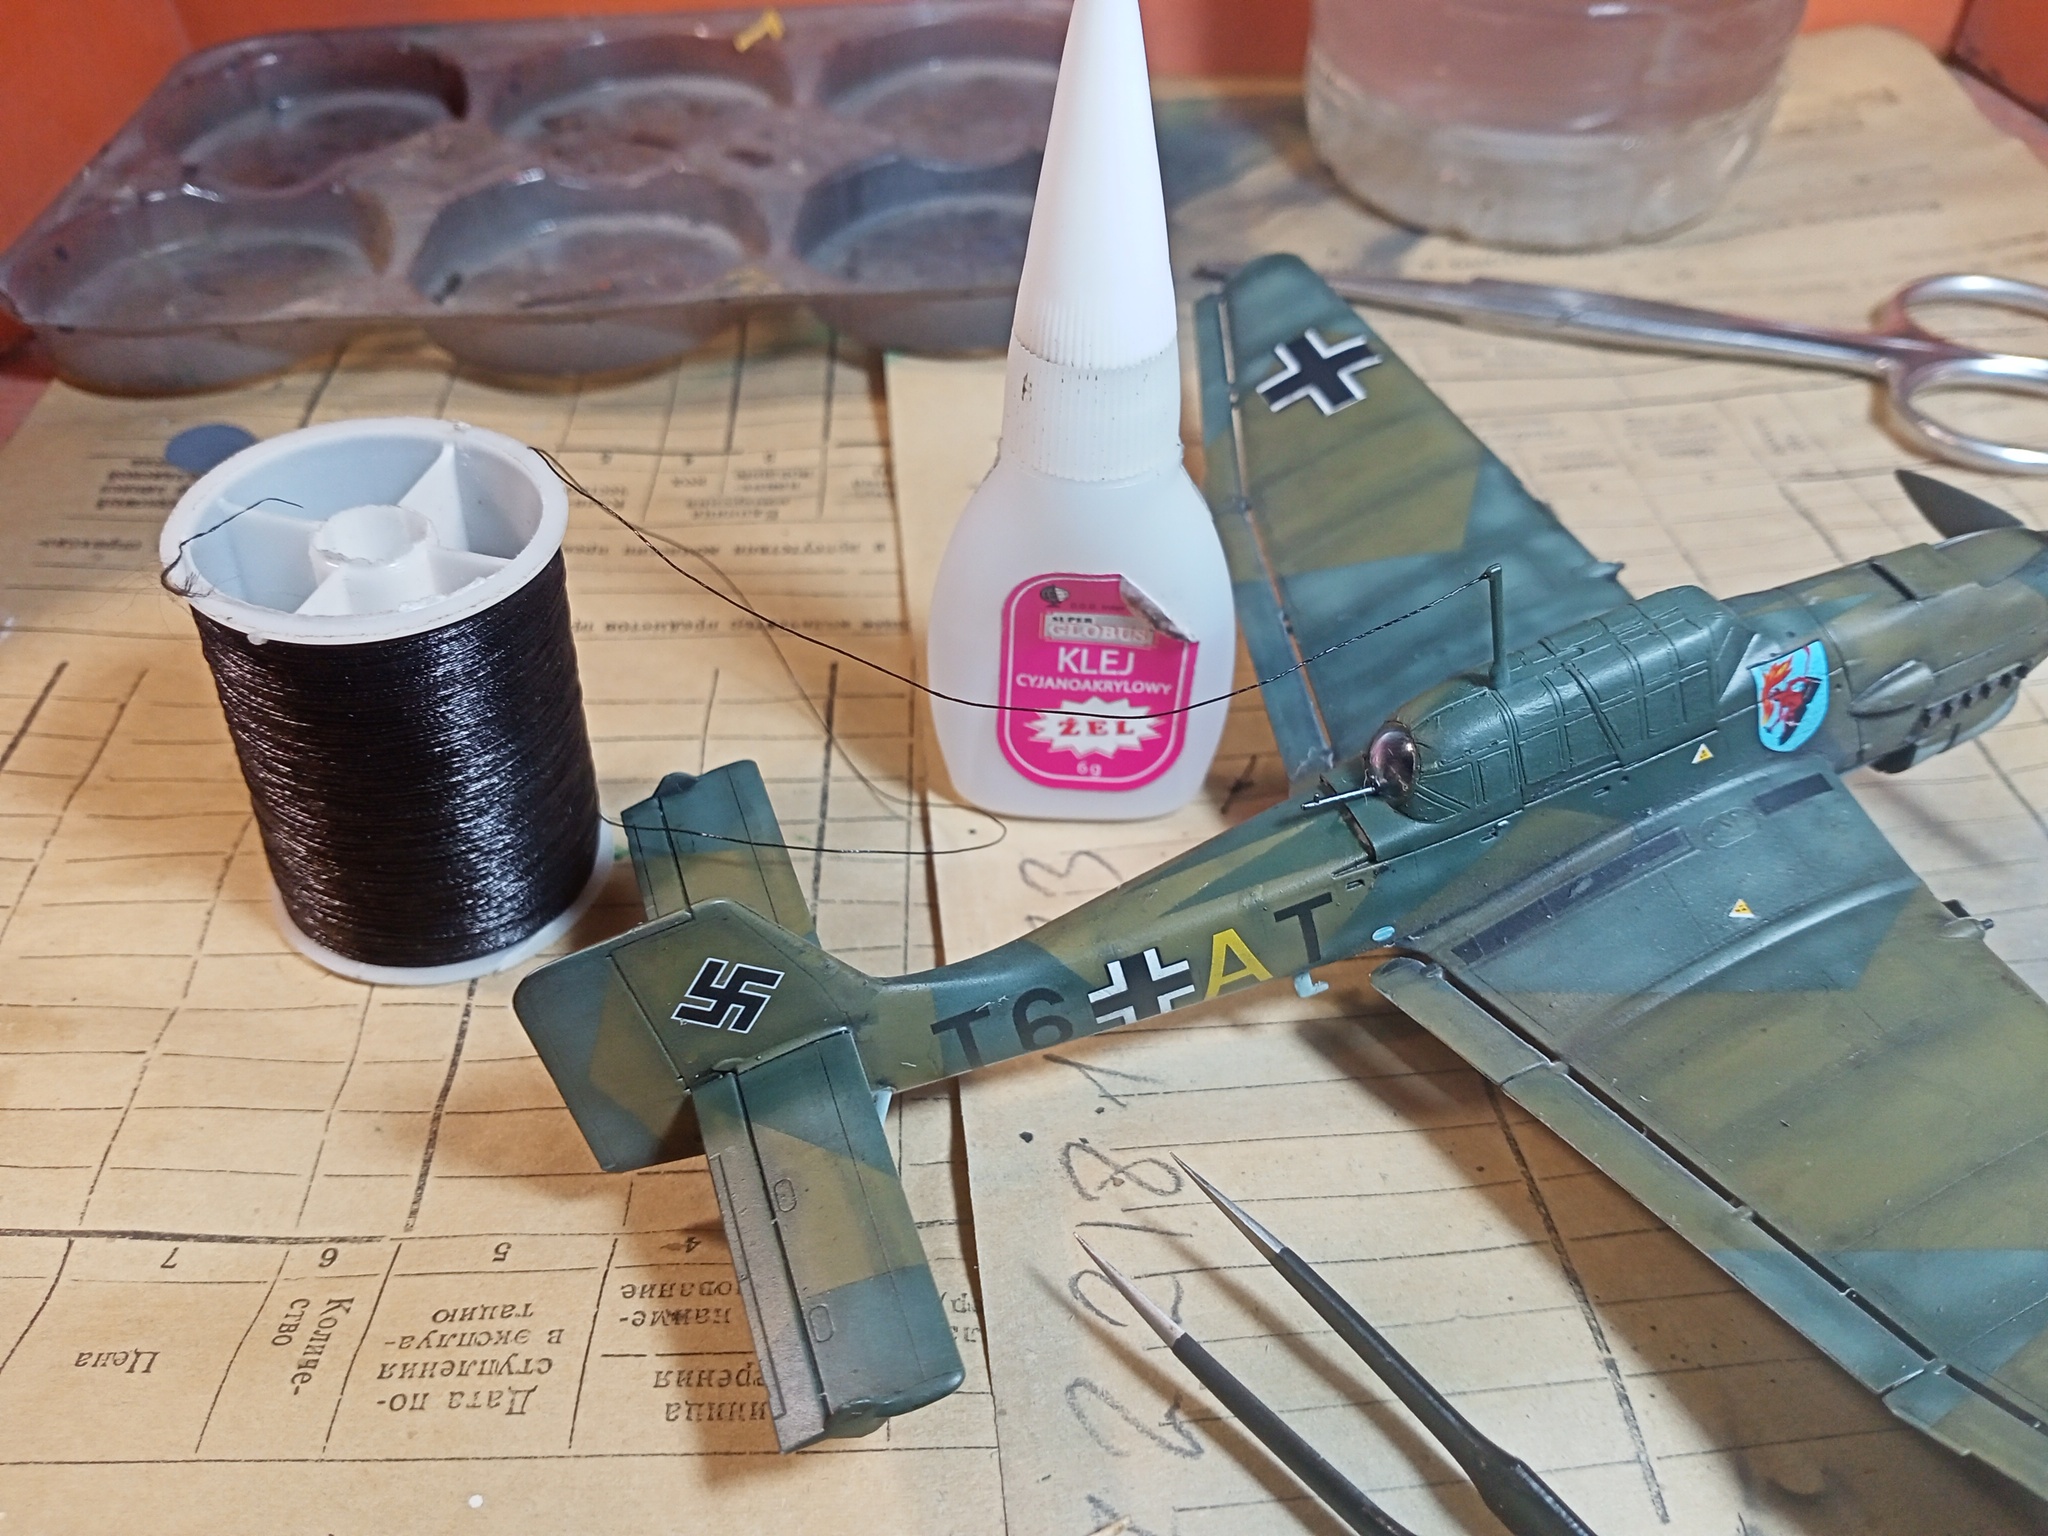 Junkers Ju.87B-2 Stuka (1/72 Zvezda). Assembly notes - My, Stand modeling, Modeling, Scale model, Miniature, Painting miniatures, With your own hands, Needlework with process, Needlework, Aviation, The Second World War, Airplane, Germany, Luftwaffe, Prefabricated model, Airbrushing, Overview, Bomber, Junkers, Thing, Longpost